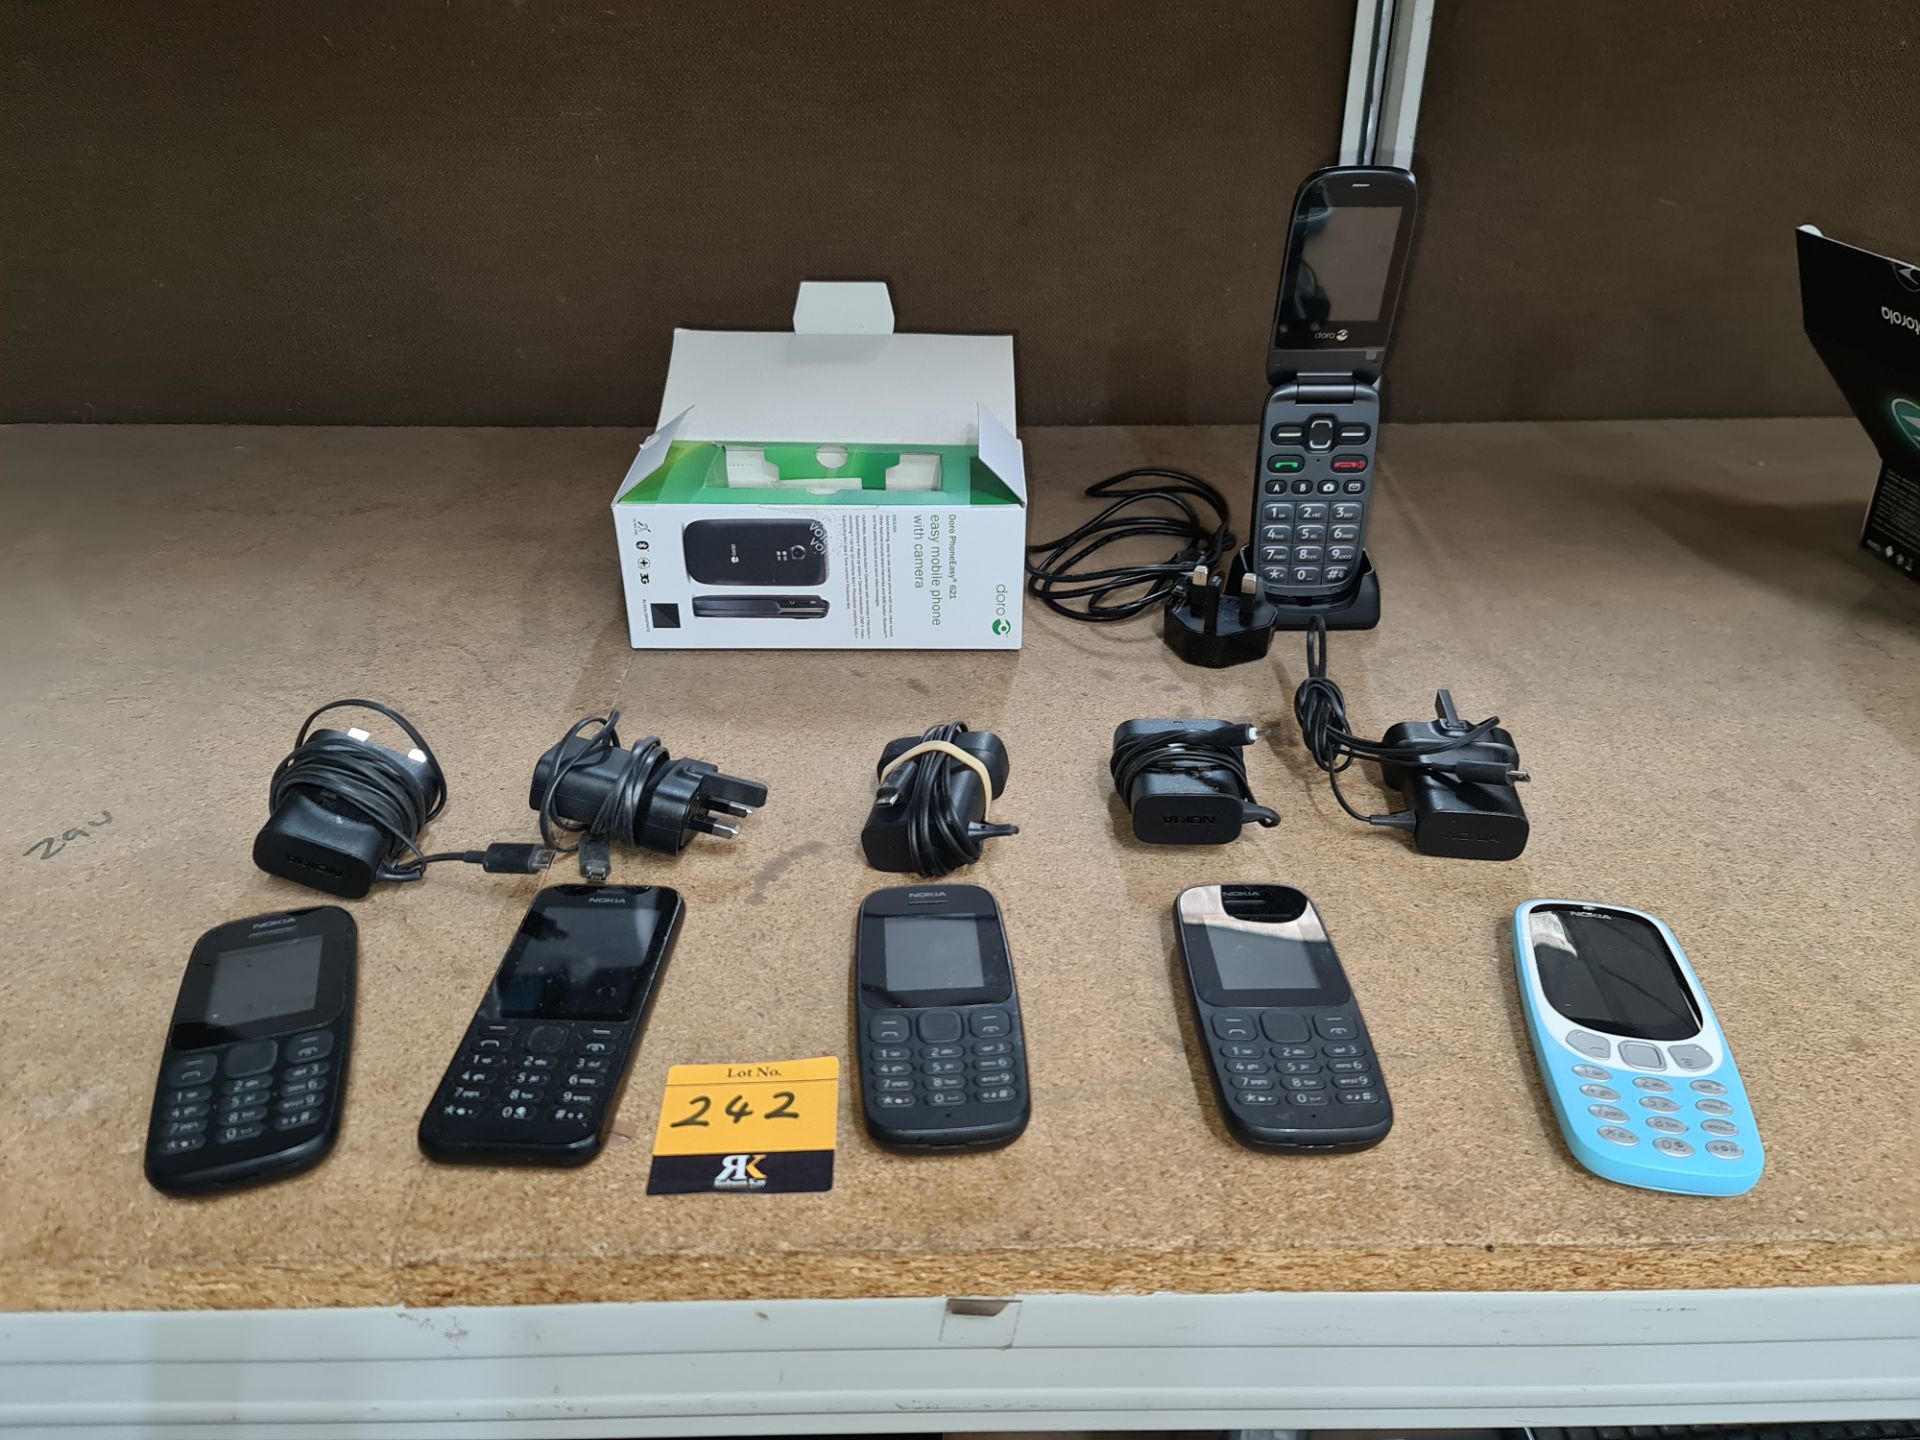 5 off Nokia mobile phones, each including charger plus Doro mobile flip phone including docking stat